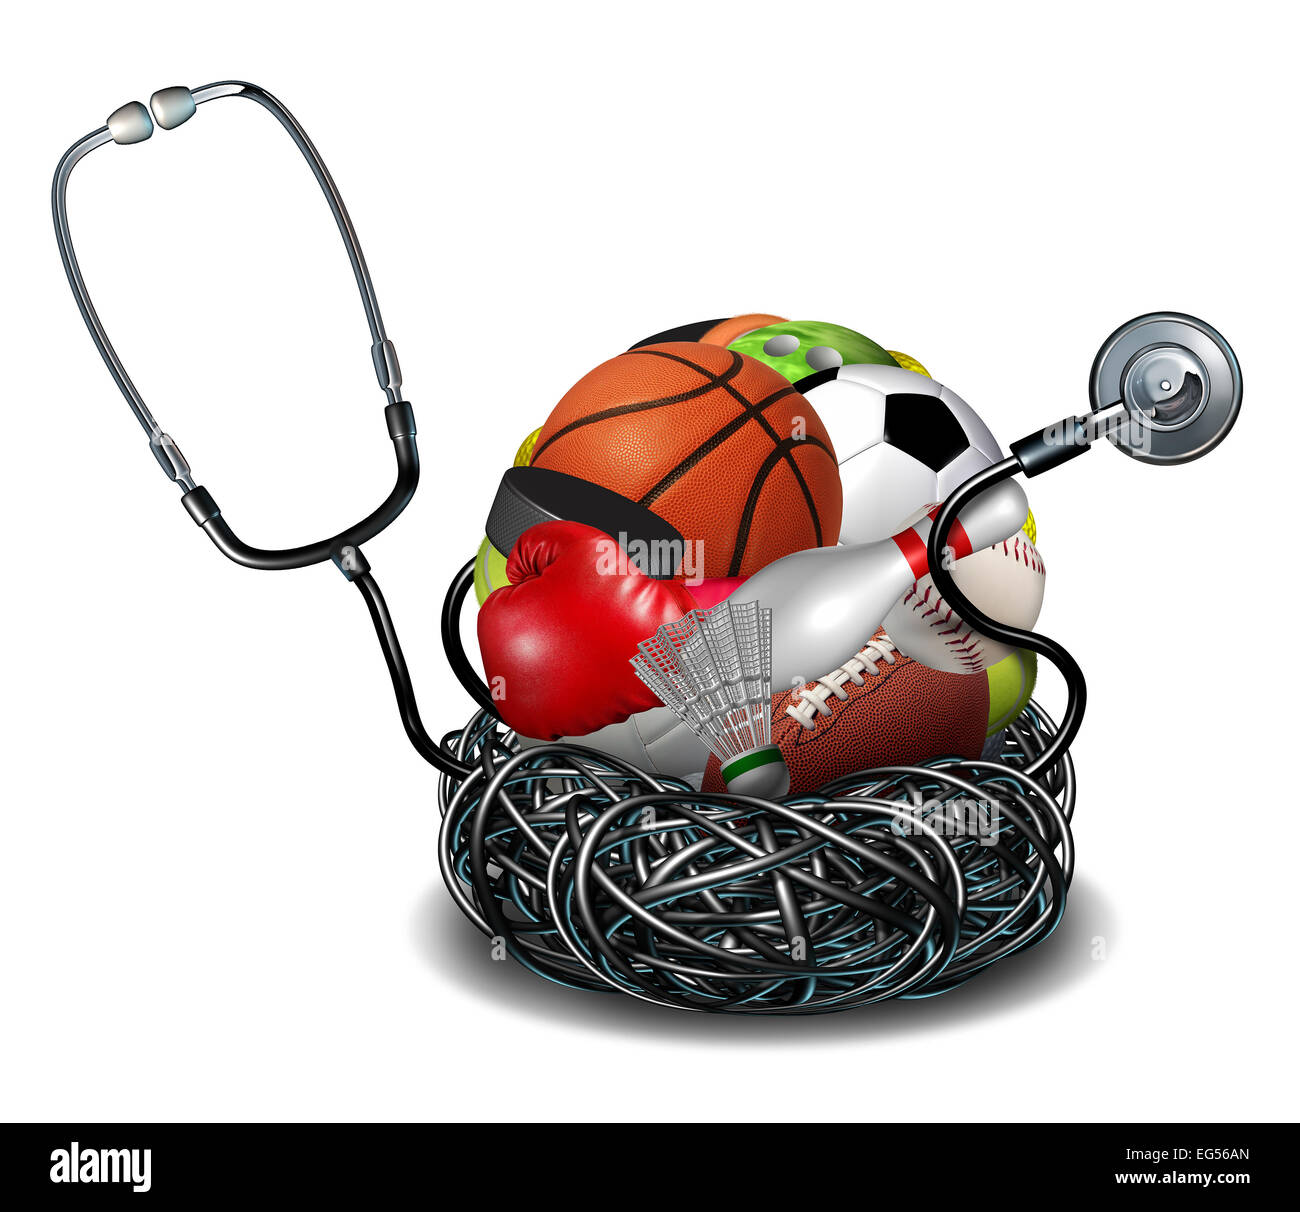 Sports medicine concept and athletic medical care symbol as a doctor stethoscope tangled around a group of sport equipment icons for soccer football basketball and baseball. Stock Photo